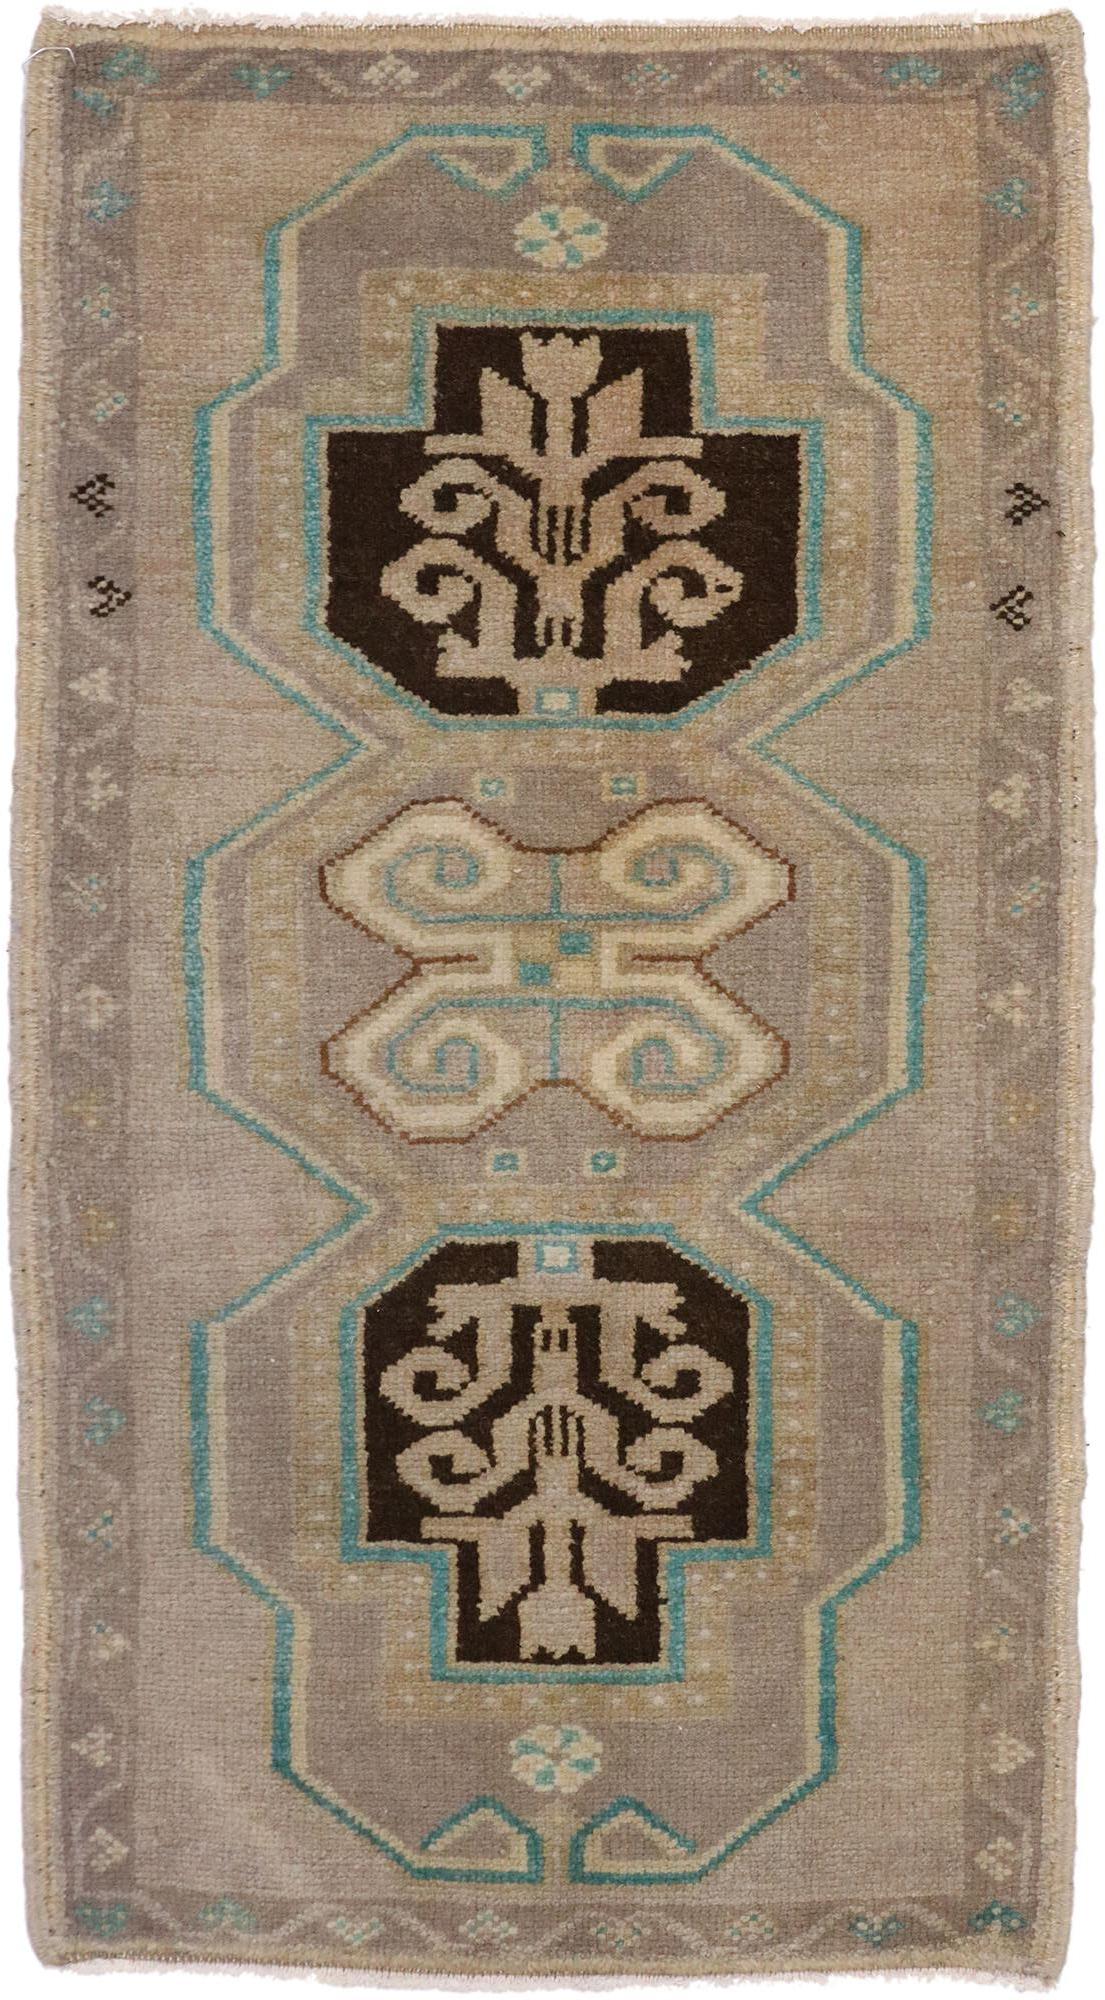 52276 Vintage Turkish Oushak Yastik Scatter Rug, Small Accent Rug 01'07 x 02'10. This hand-knotted wool vintage Turkish Oushak Yastik scatter rug features a botanical scene composed of ambiguous Anatolian symbols on an abrashed field. It is enclosed